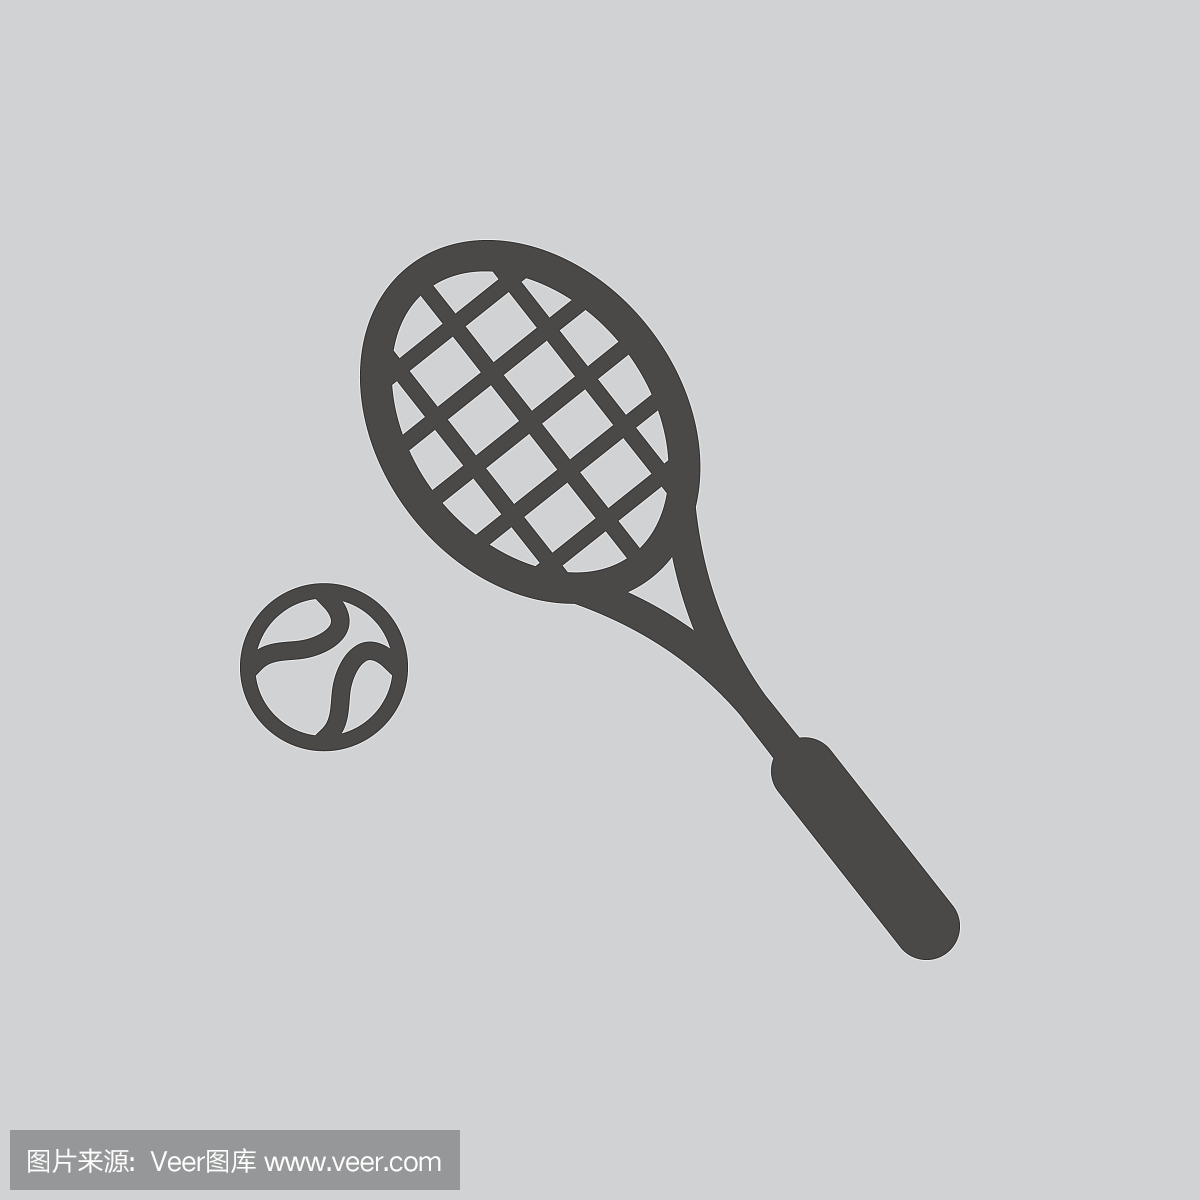 Tennis icon isolated sign symbol and flat style for app, web and digital design.